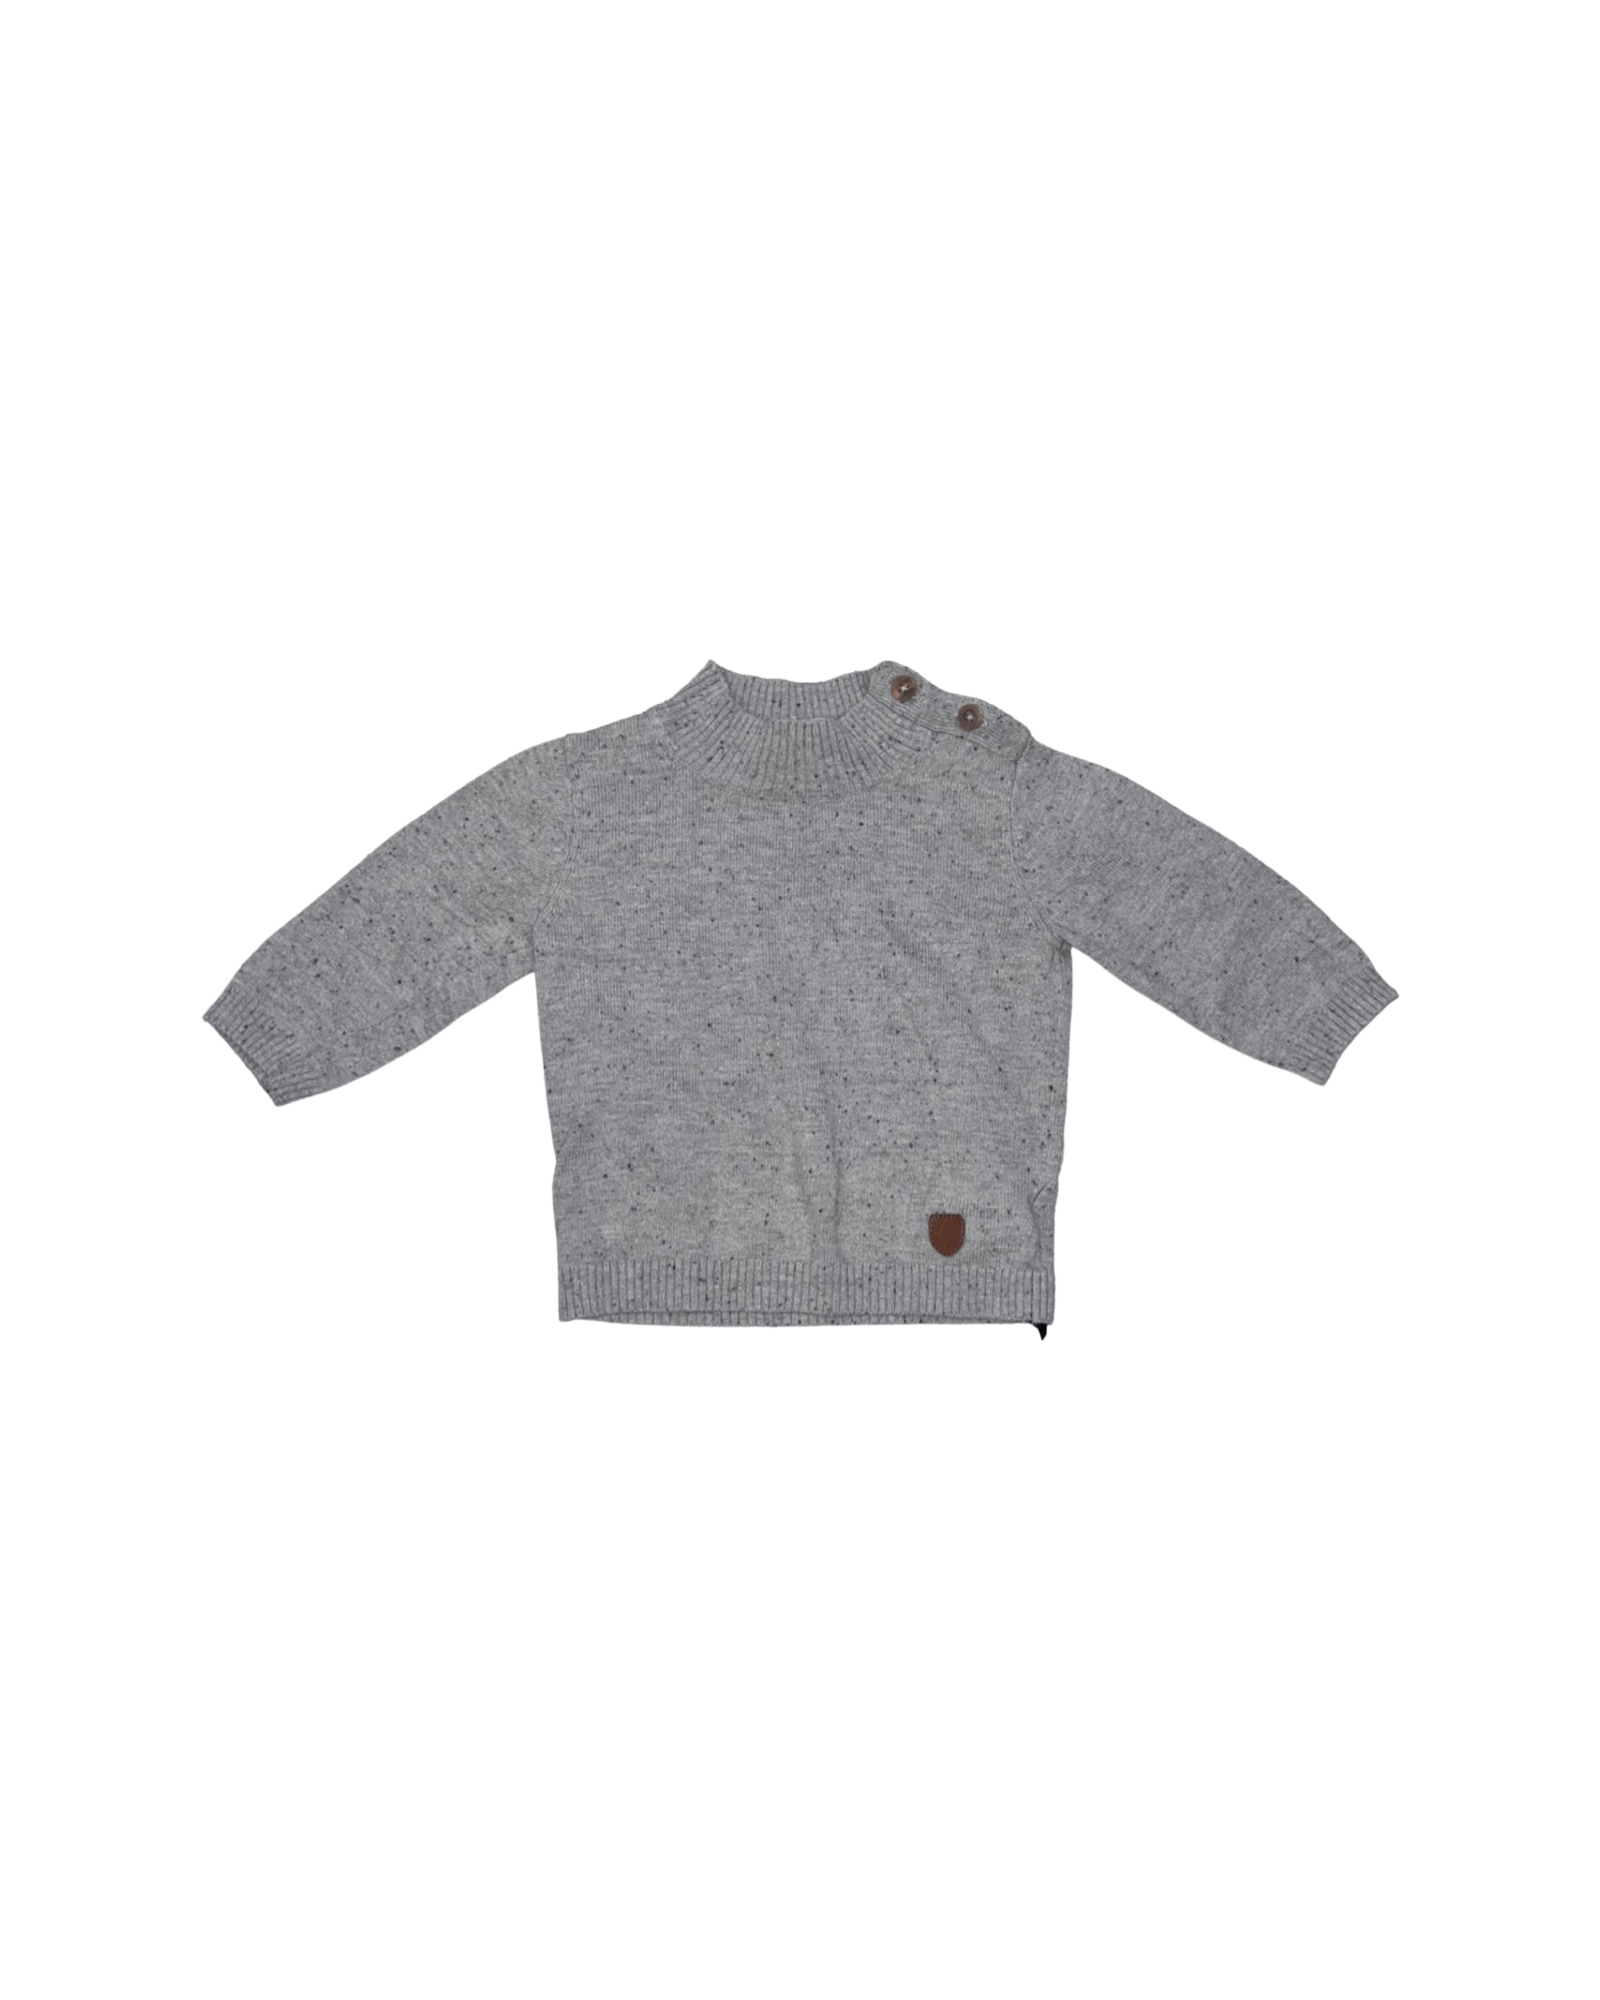 H&M Grey Sweater with Brown Patch (4-6M)